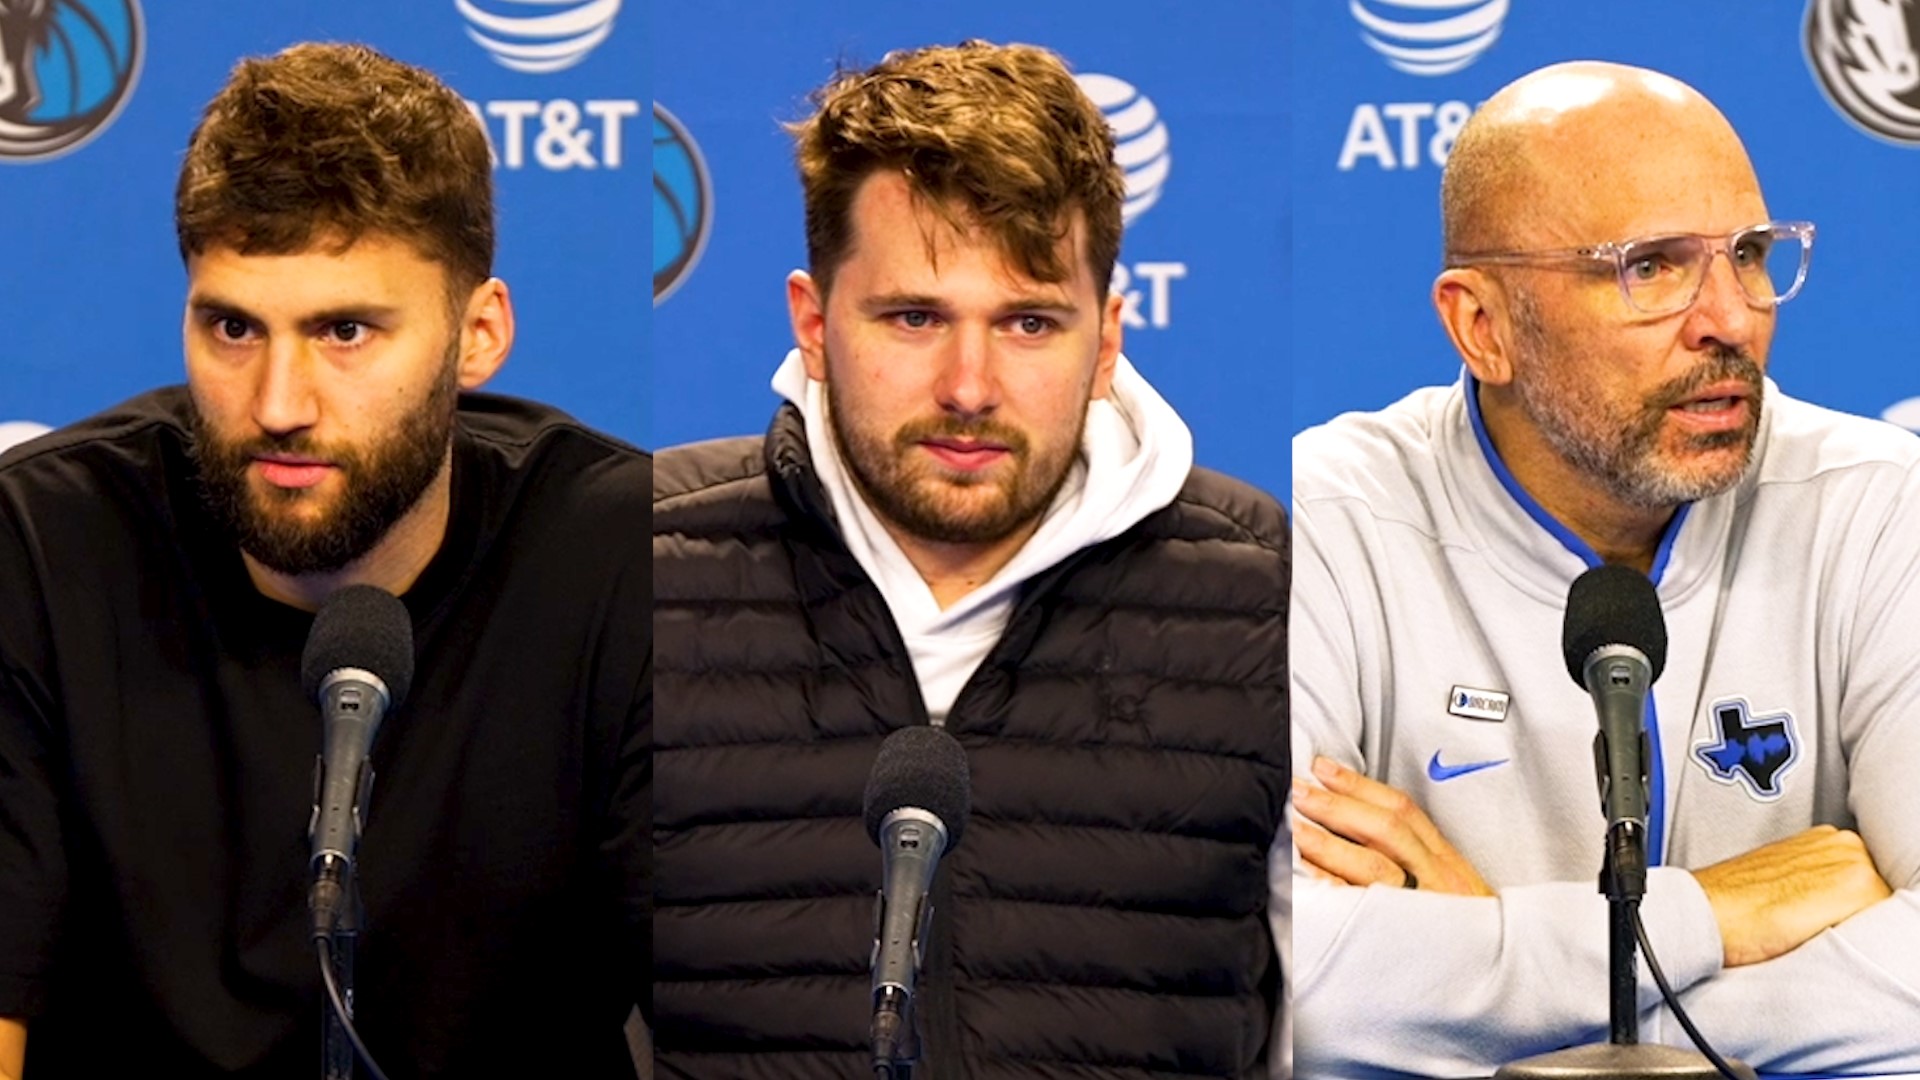 Luka Doncic had 40 points and 11 assists for the Mavericks, who had their biggest blown lead in a loss this season. Here are the team's postgame interviews.